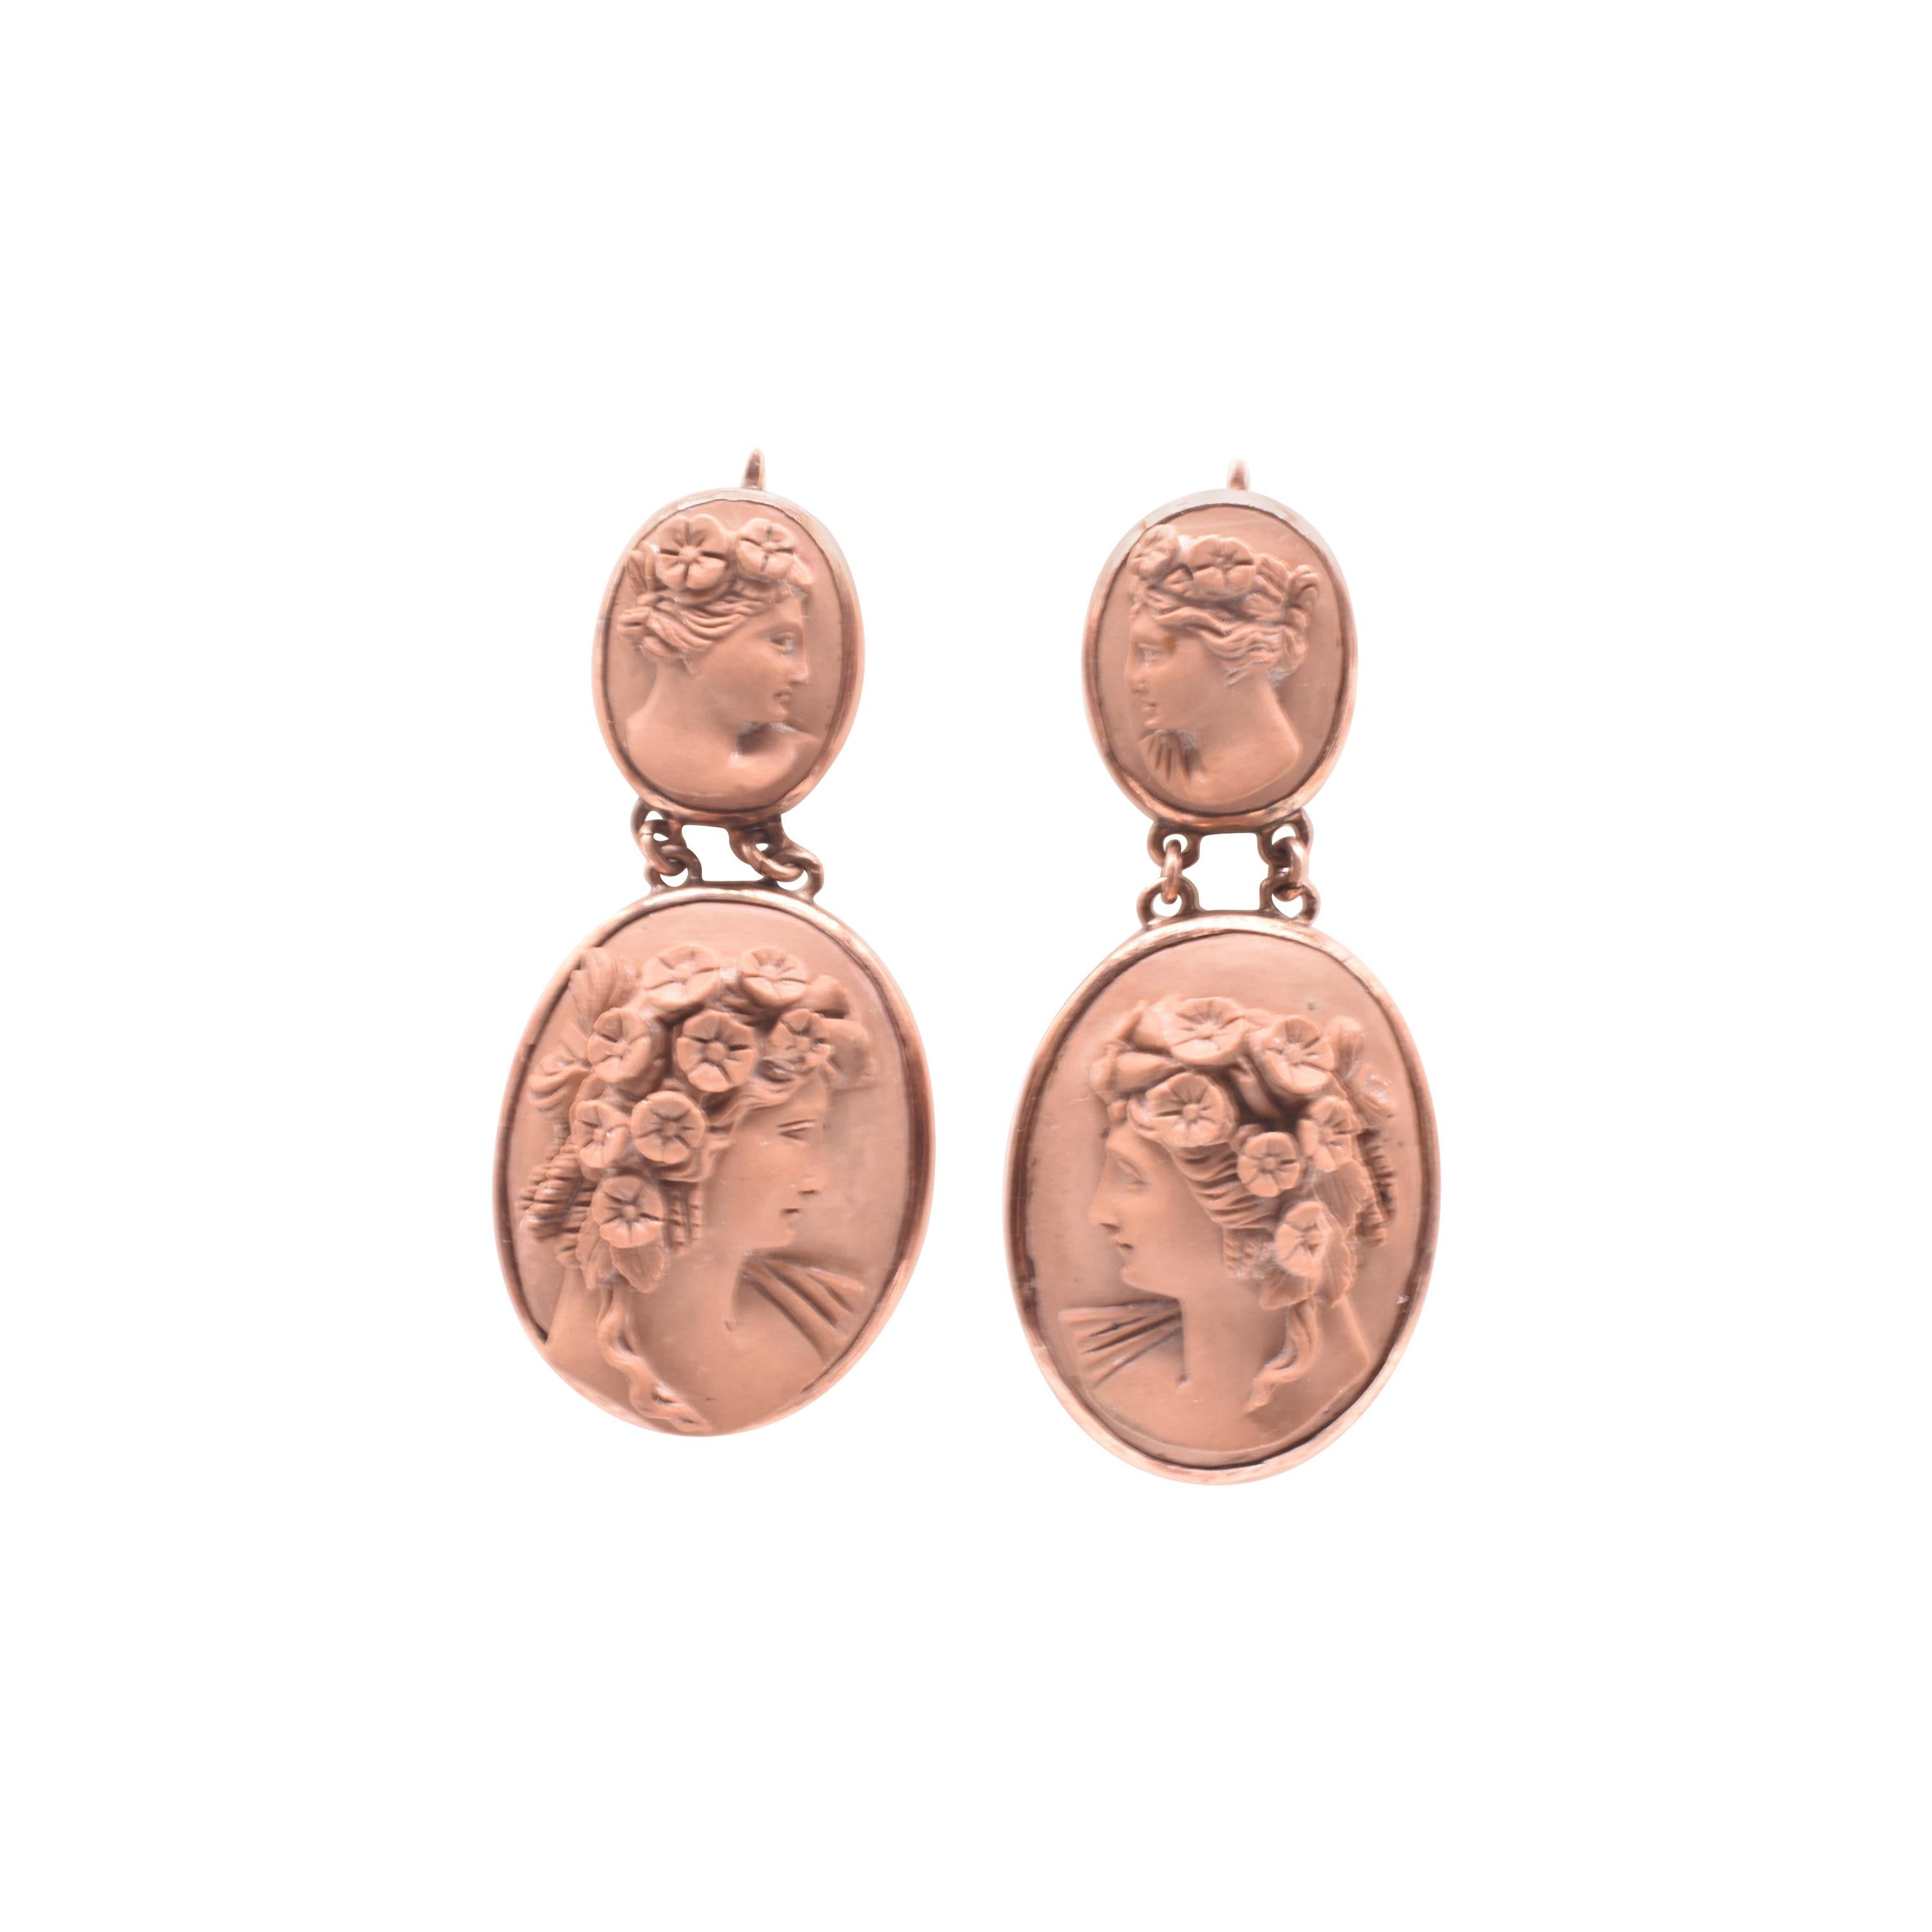 Carved Lava Cameo Earrings of Flora in the NeoClassical Tradition